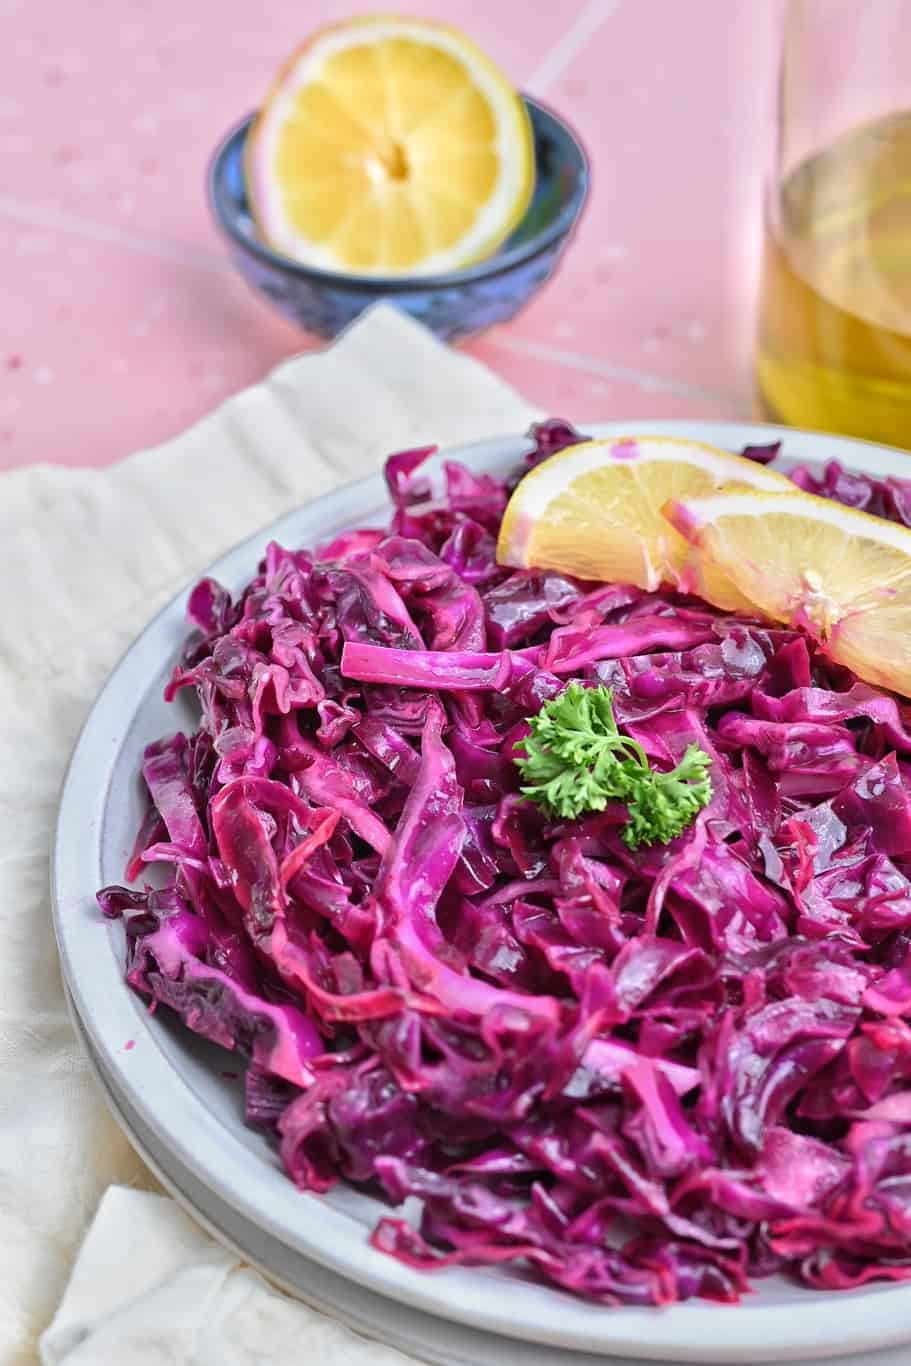 Turkish red cabbage salad served with some lemon wedges